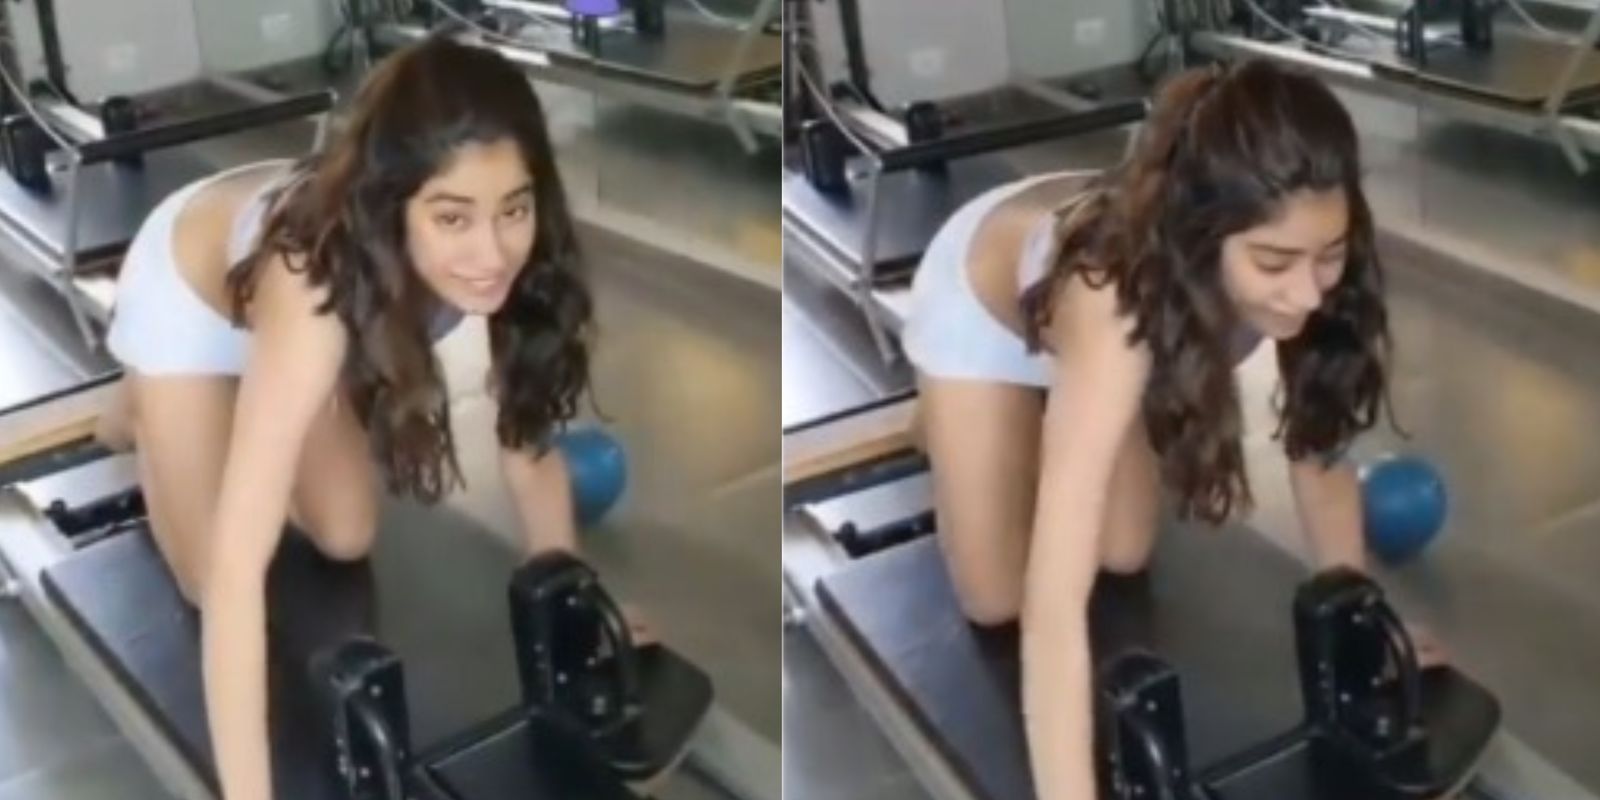 Janhvi Kapoor Sings ‘Sheila Ki Jawani’ For Motivation While Working Out In This Throwback Clip; Watch